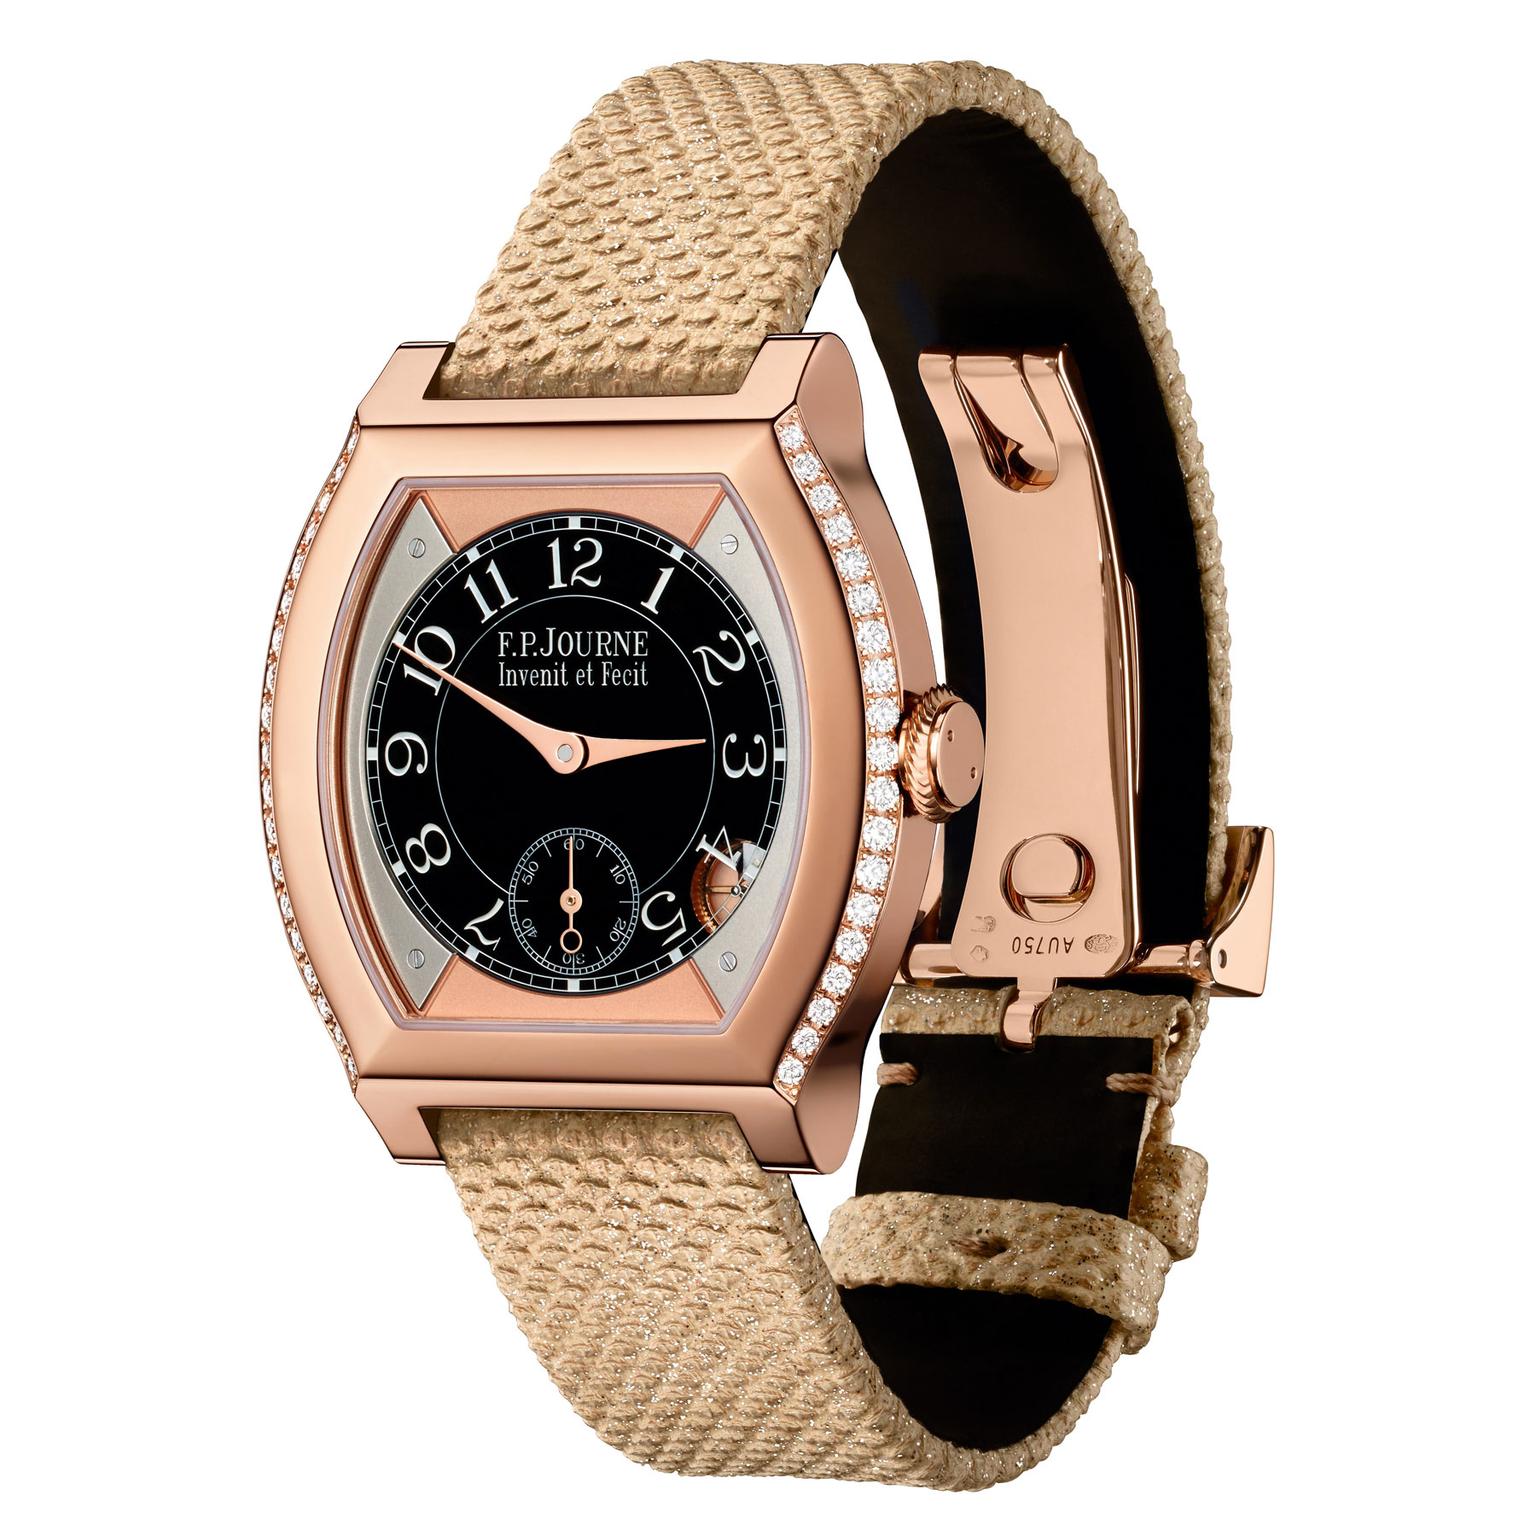 Stylish watches for women